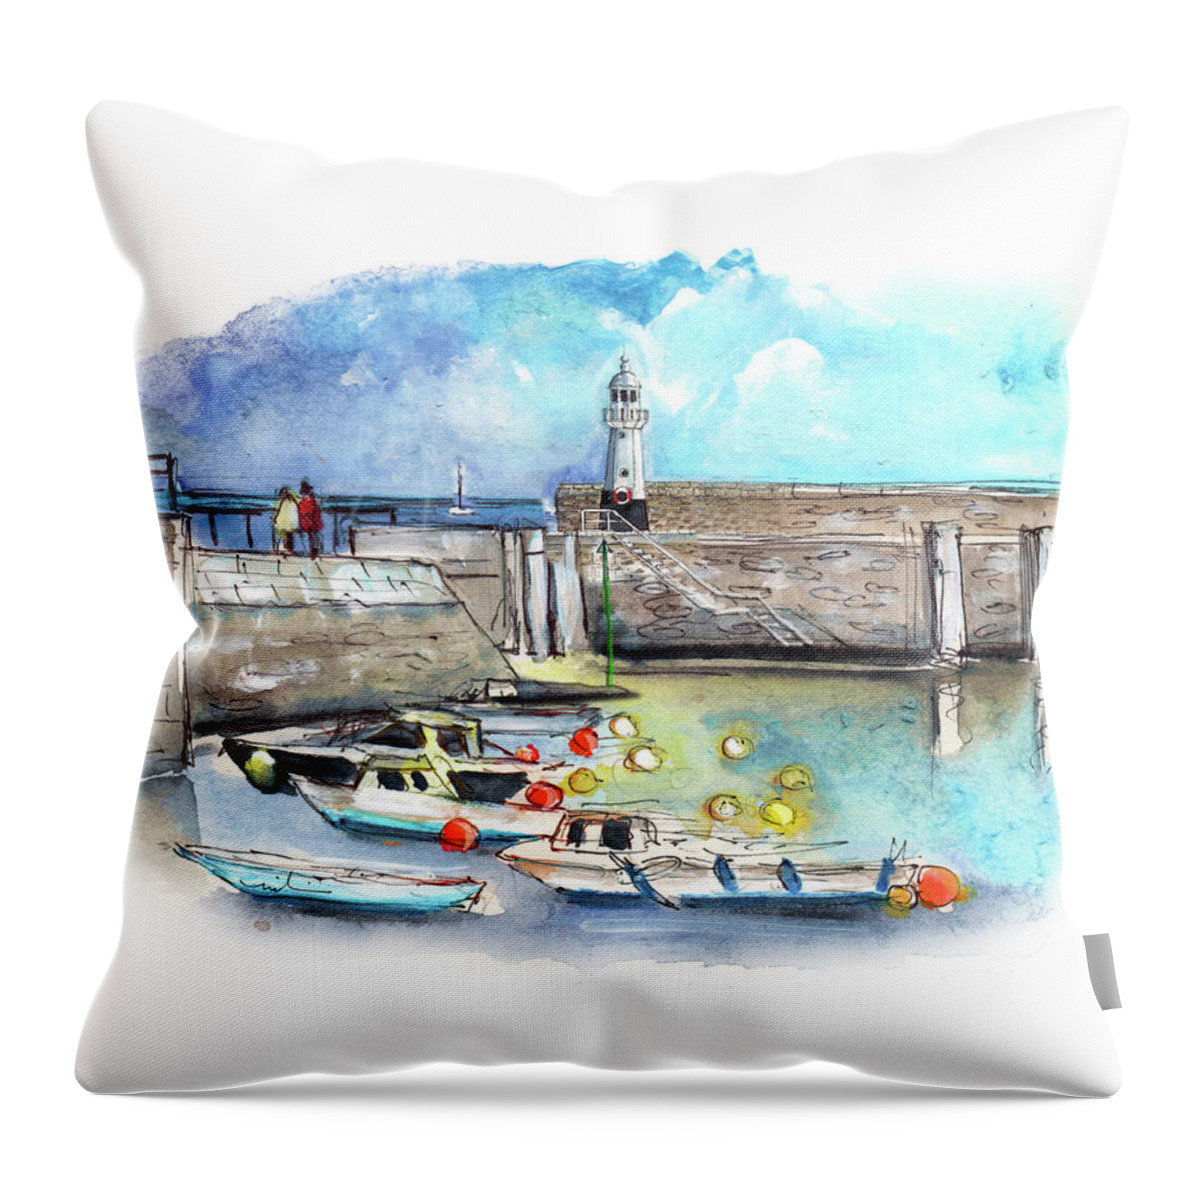 Travel Throw Pillow featuring the painting Mevagissey 01 by Miki De Goodaboom